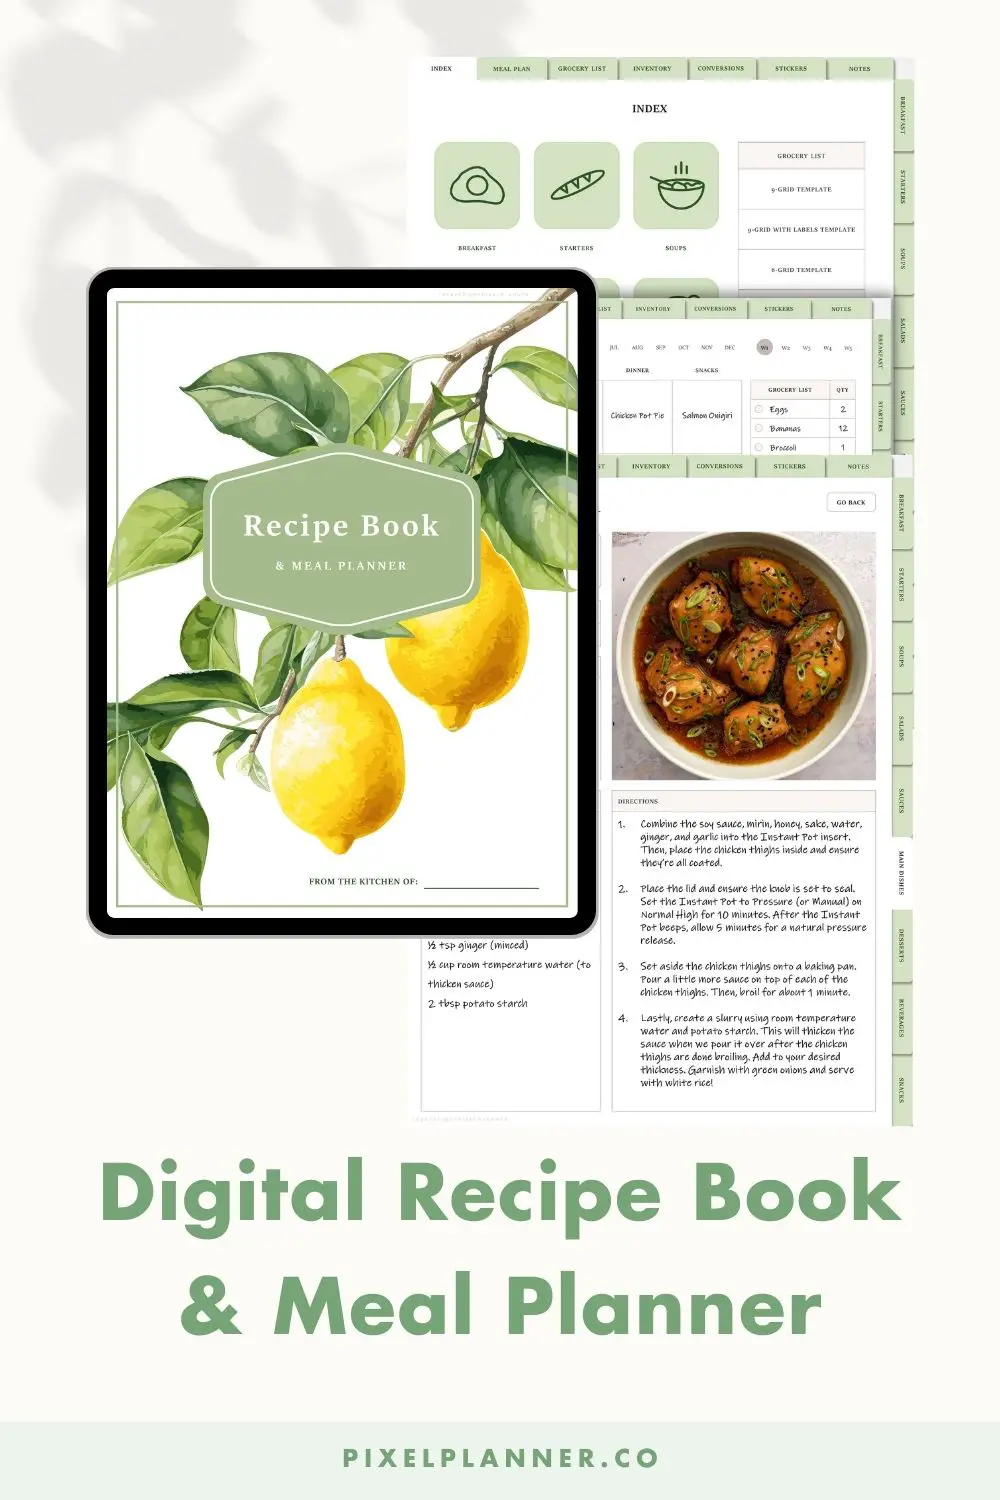 Digital Recipe Book and Meal Planner